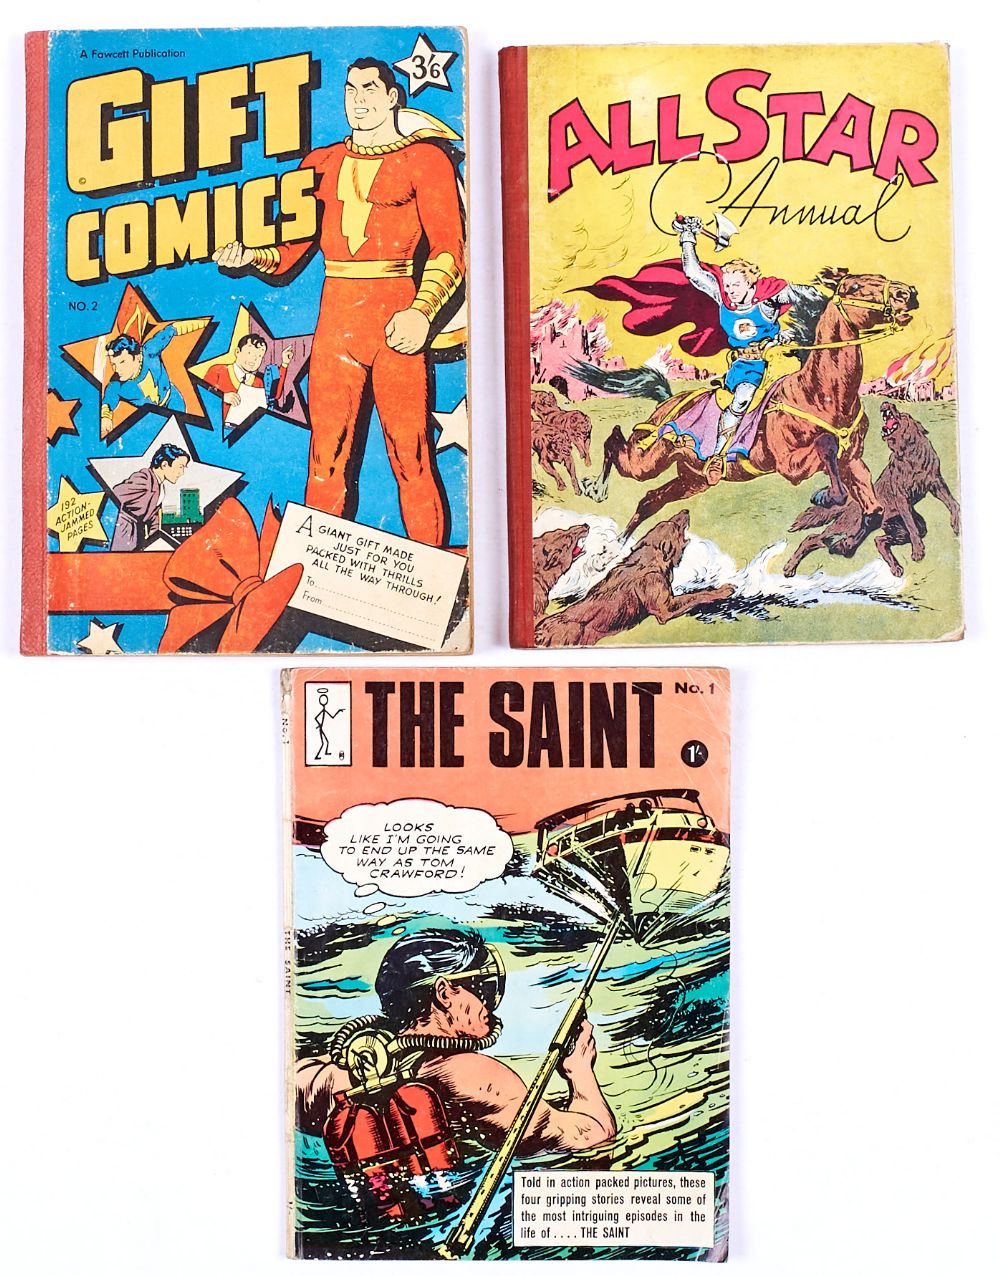 Gift Comics Album 2 (L. Miller 1952). Starring Captain Marvel, Nyoka and Tom Mix. With All Star